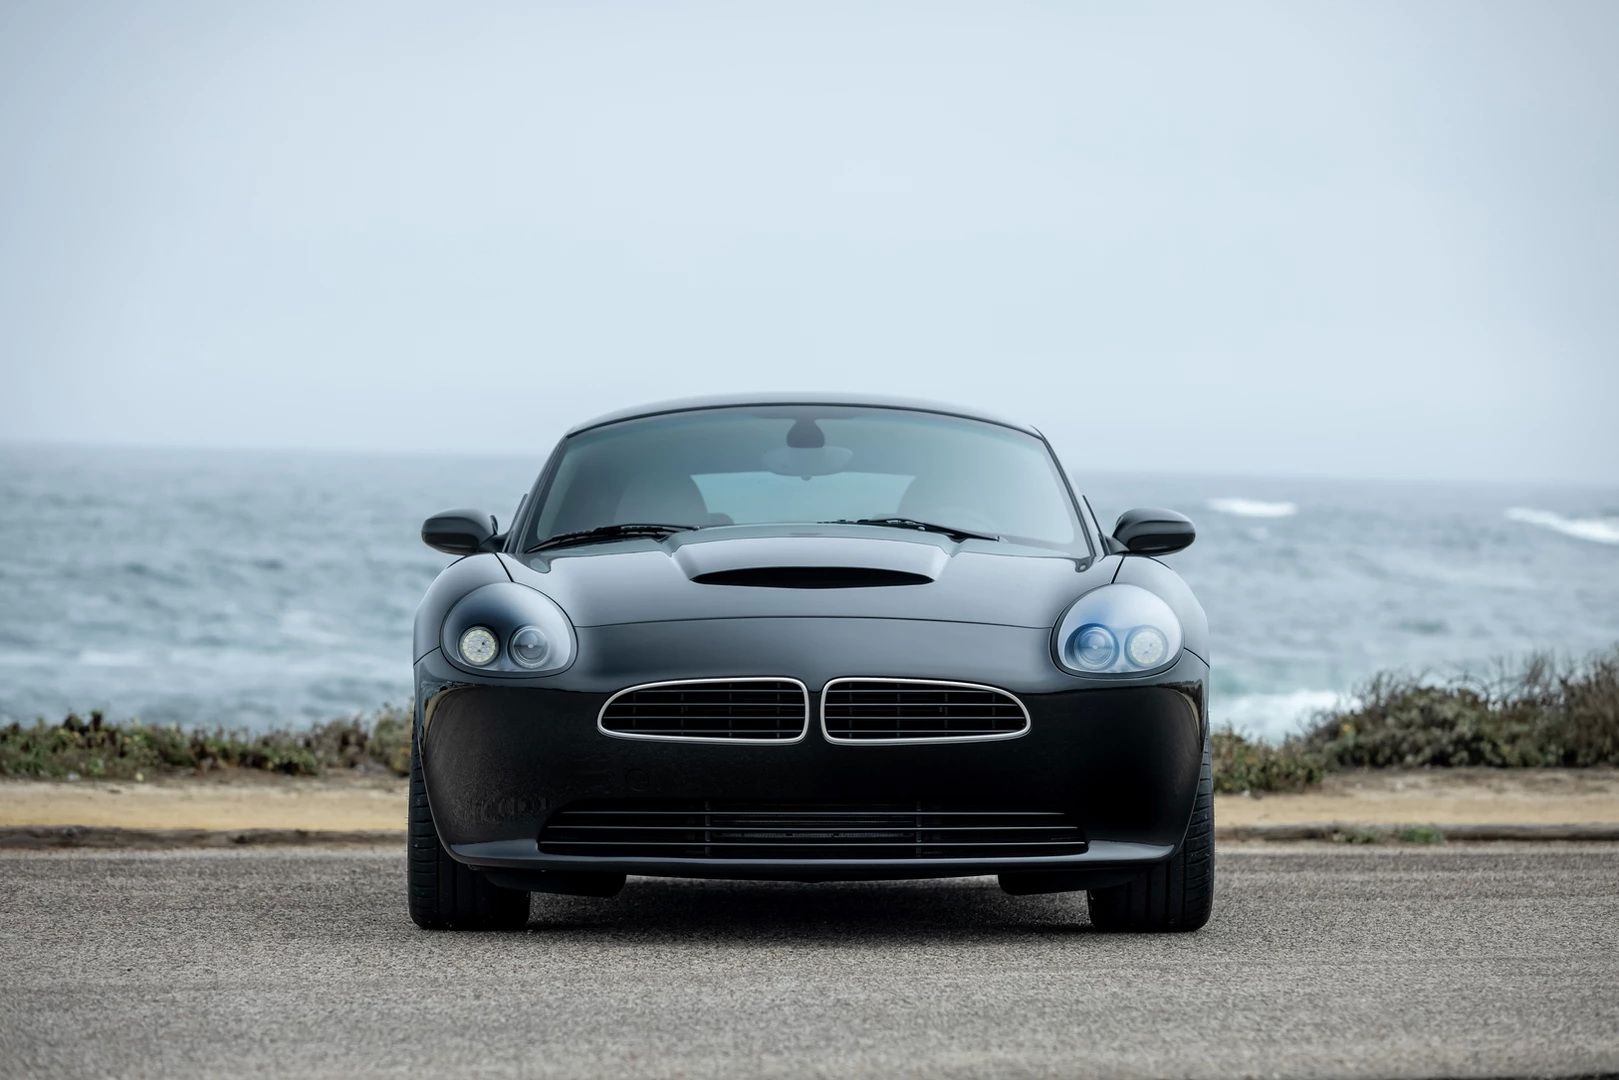 2021 SVE Oletha Is The High-Performance Z8 BMW Never Made